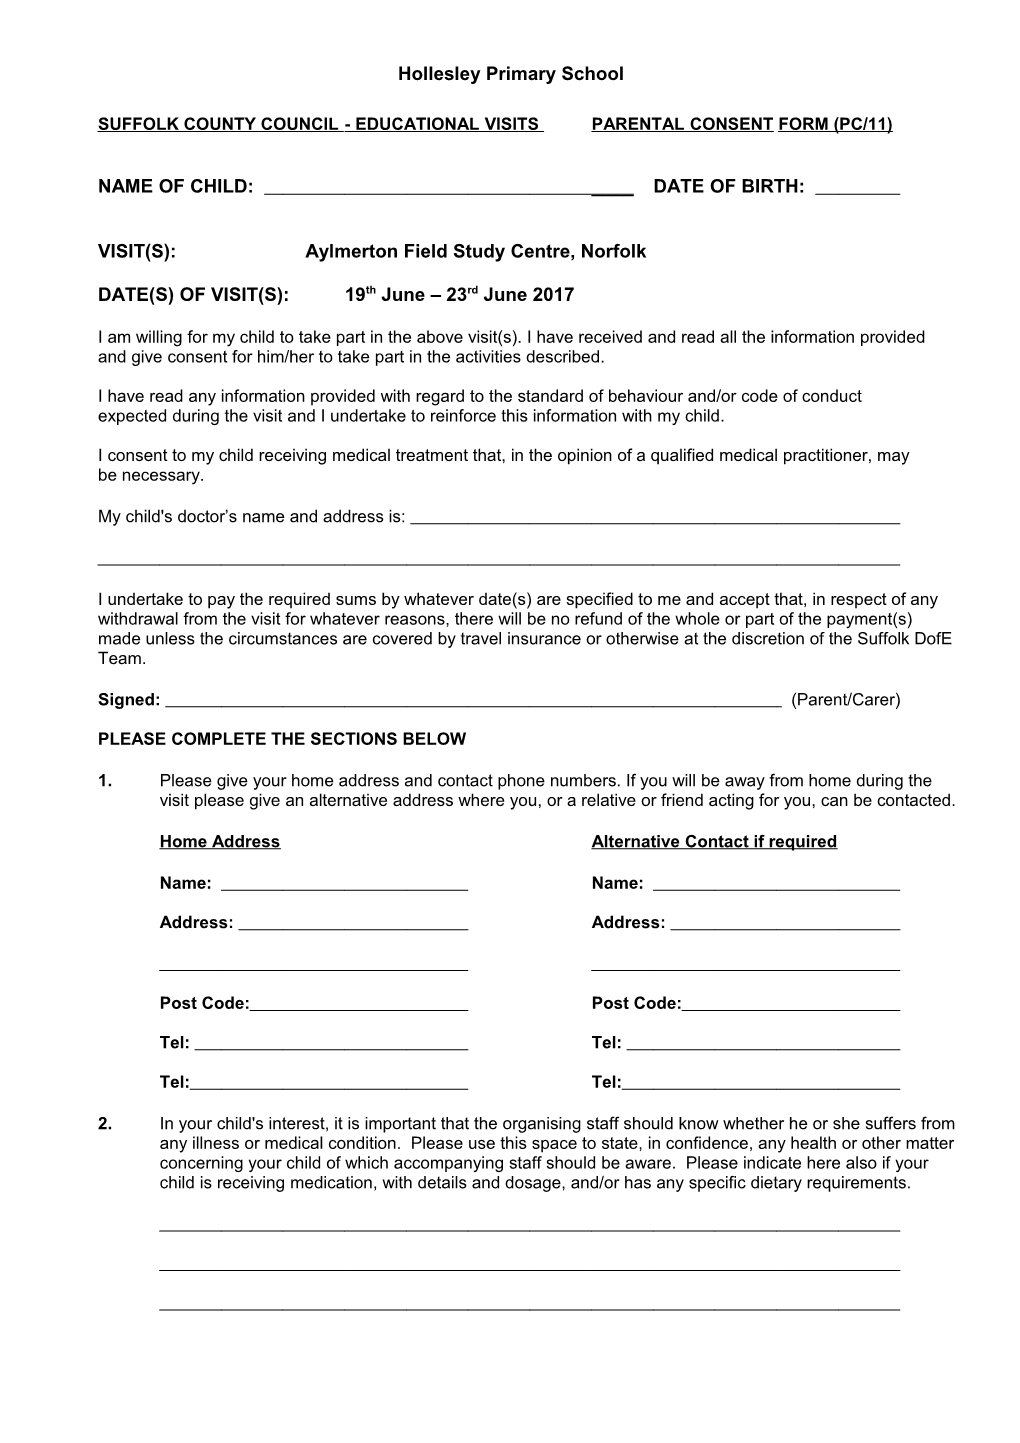 Suffolk County Council - Educational Visits Parental Consent Form (Pc/11)